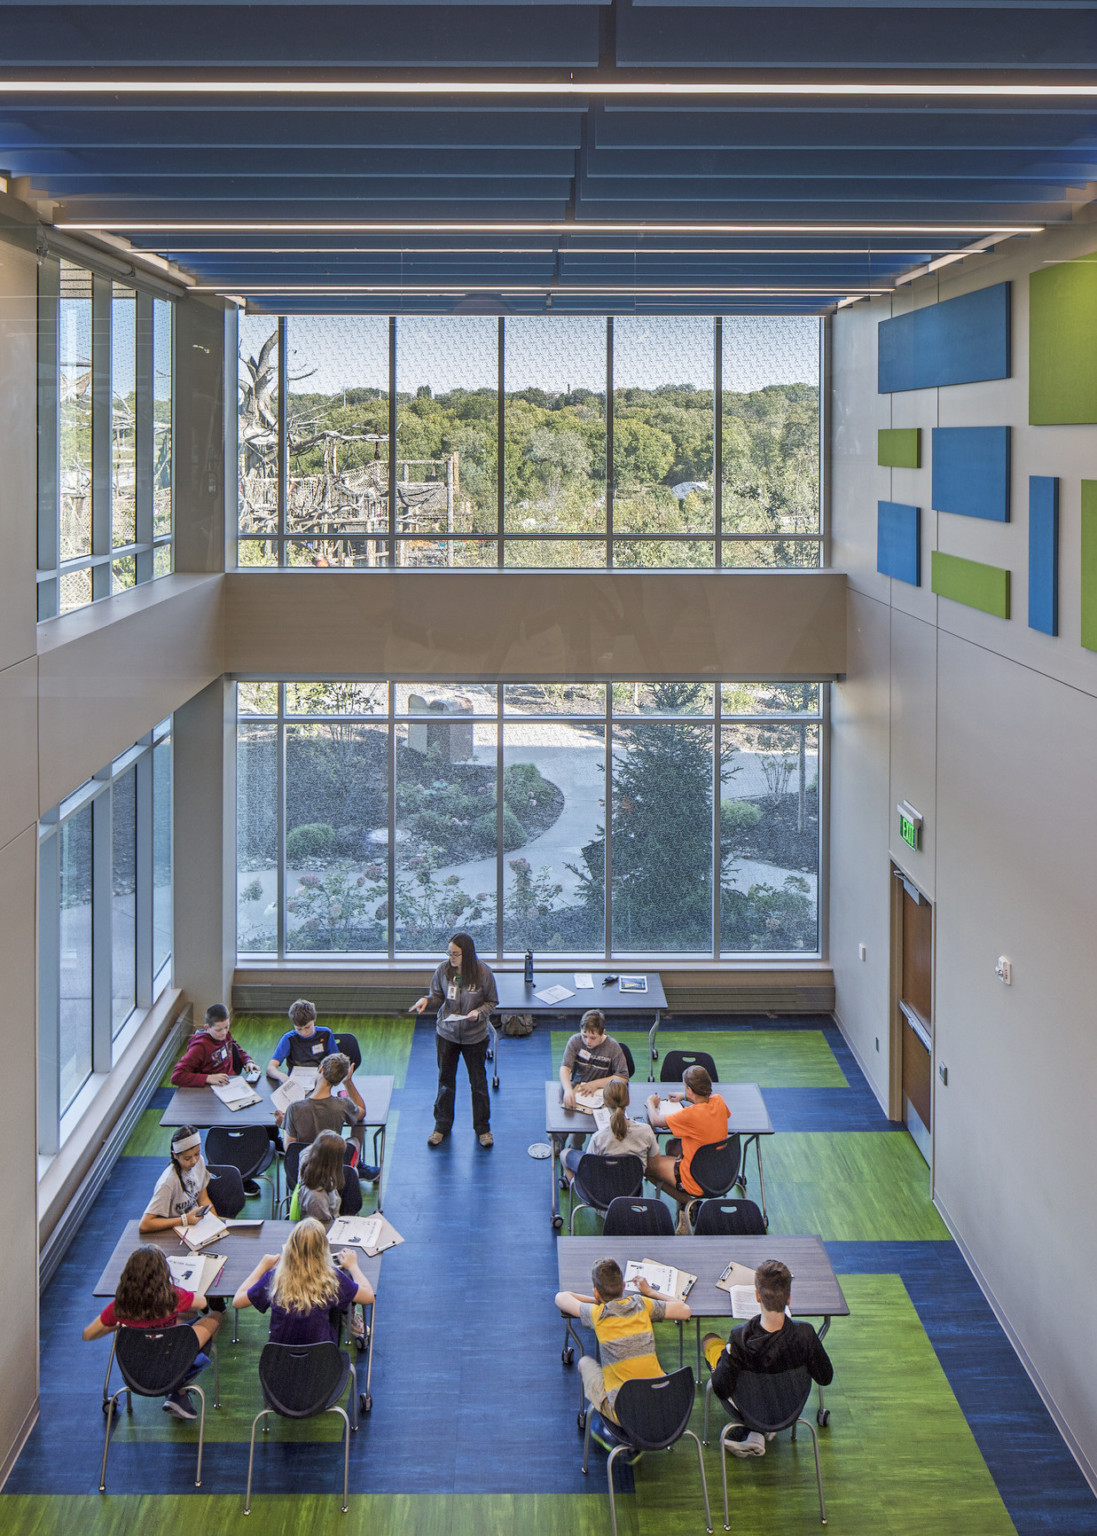 Double height classroom with window lined walls. Tables sit on green and blue carpet, these rectangles repeat on top of wall